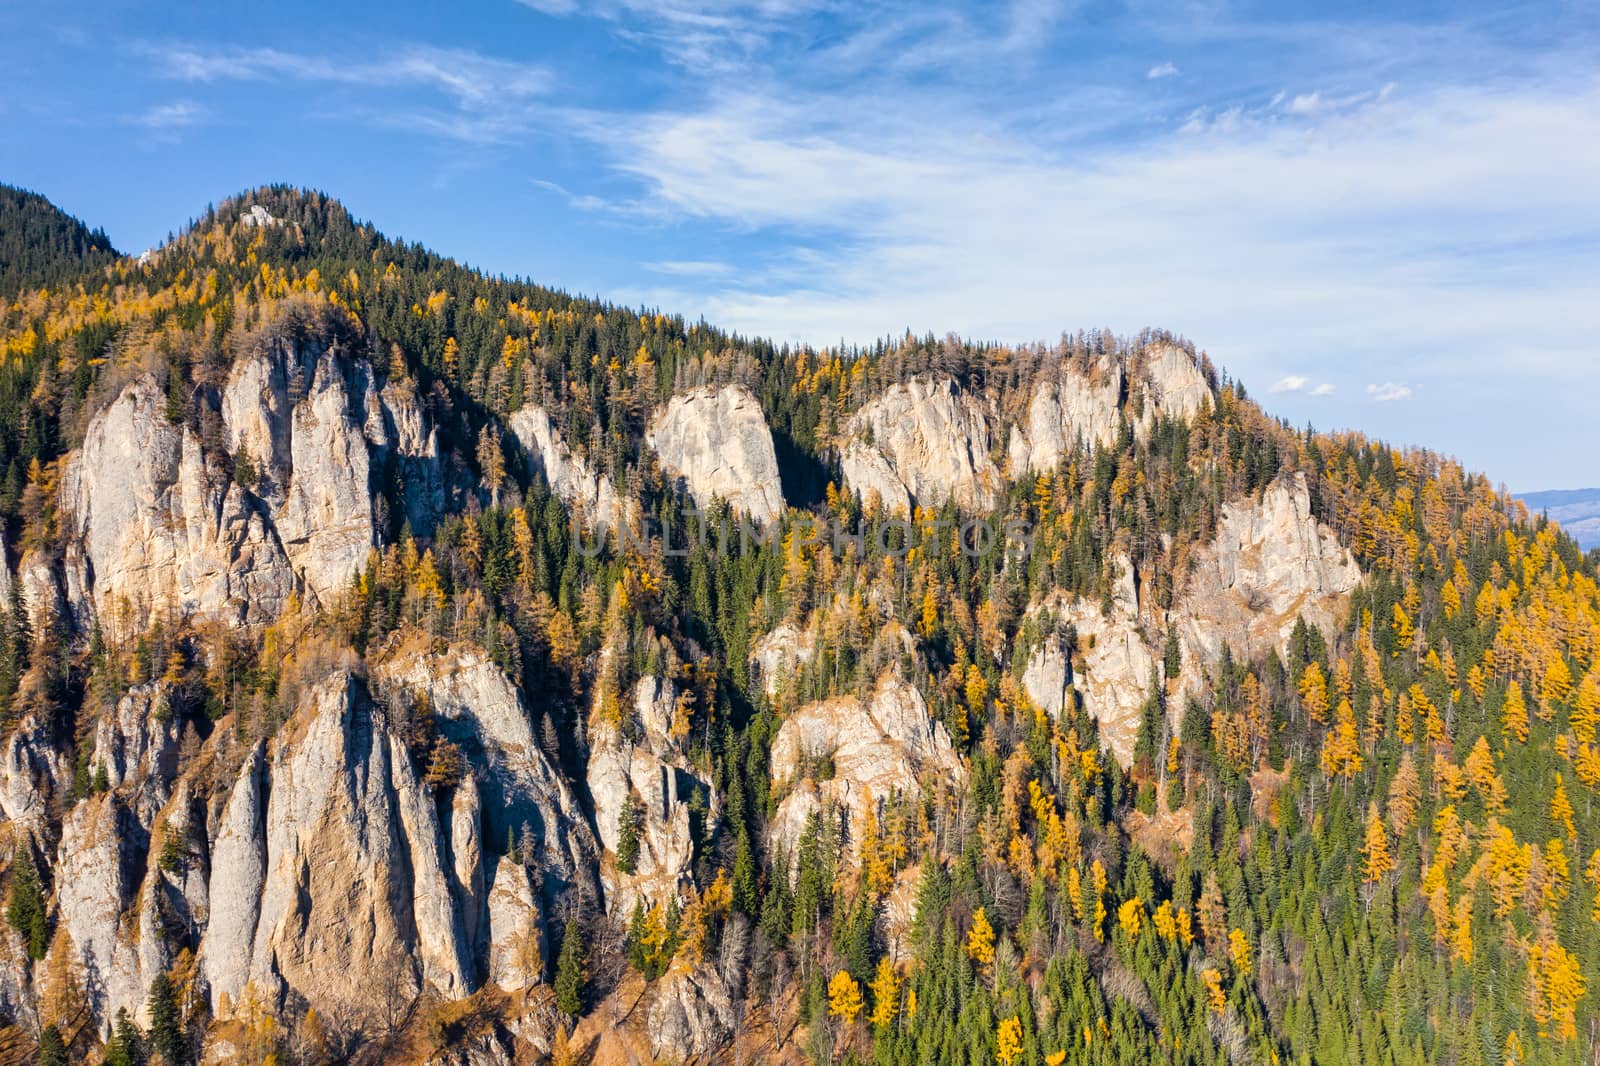 Beautiful larch trees in autumn yellow, evergreen forest and rock formation